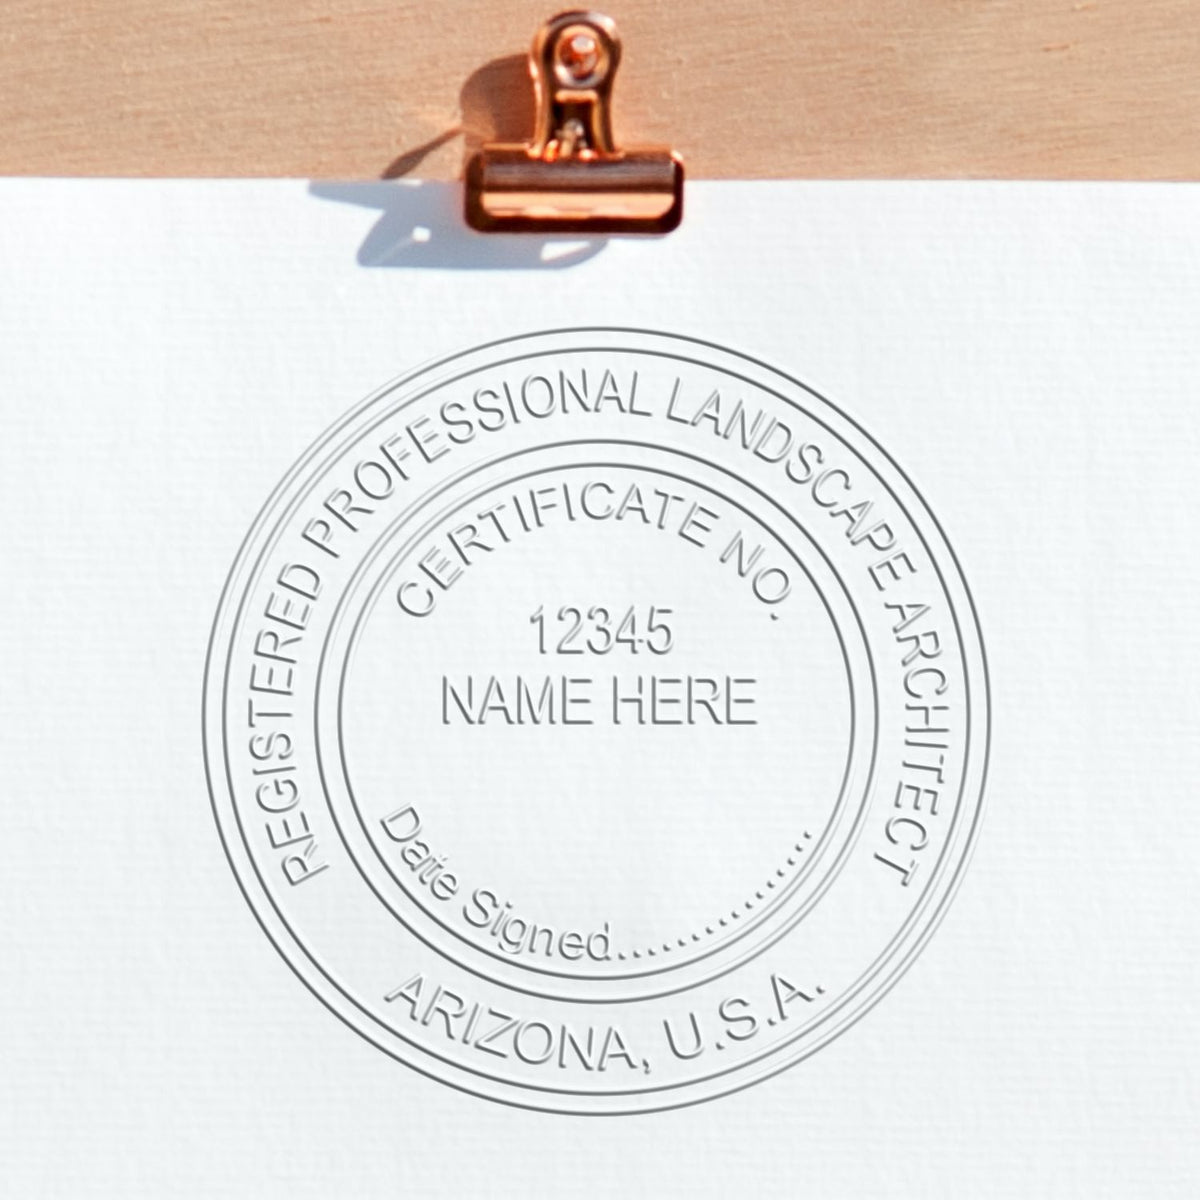 A photograph of the Hybrid Arizona Landscape Architect Seal stamp impression reveals a vivid, professional image of the on paper.